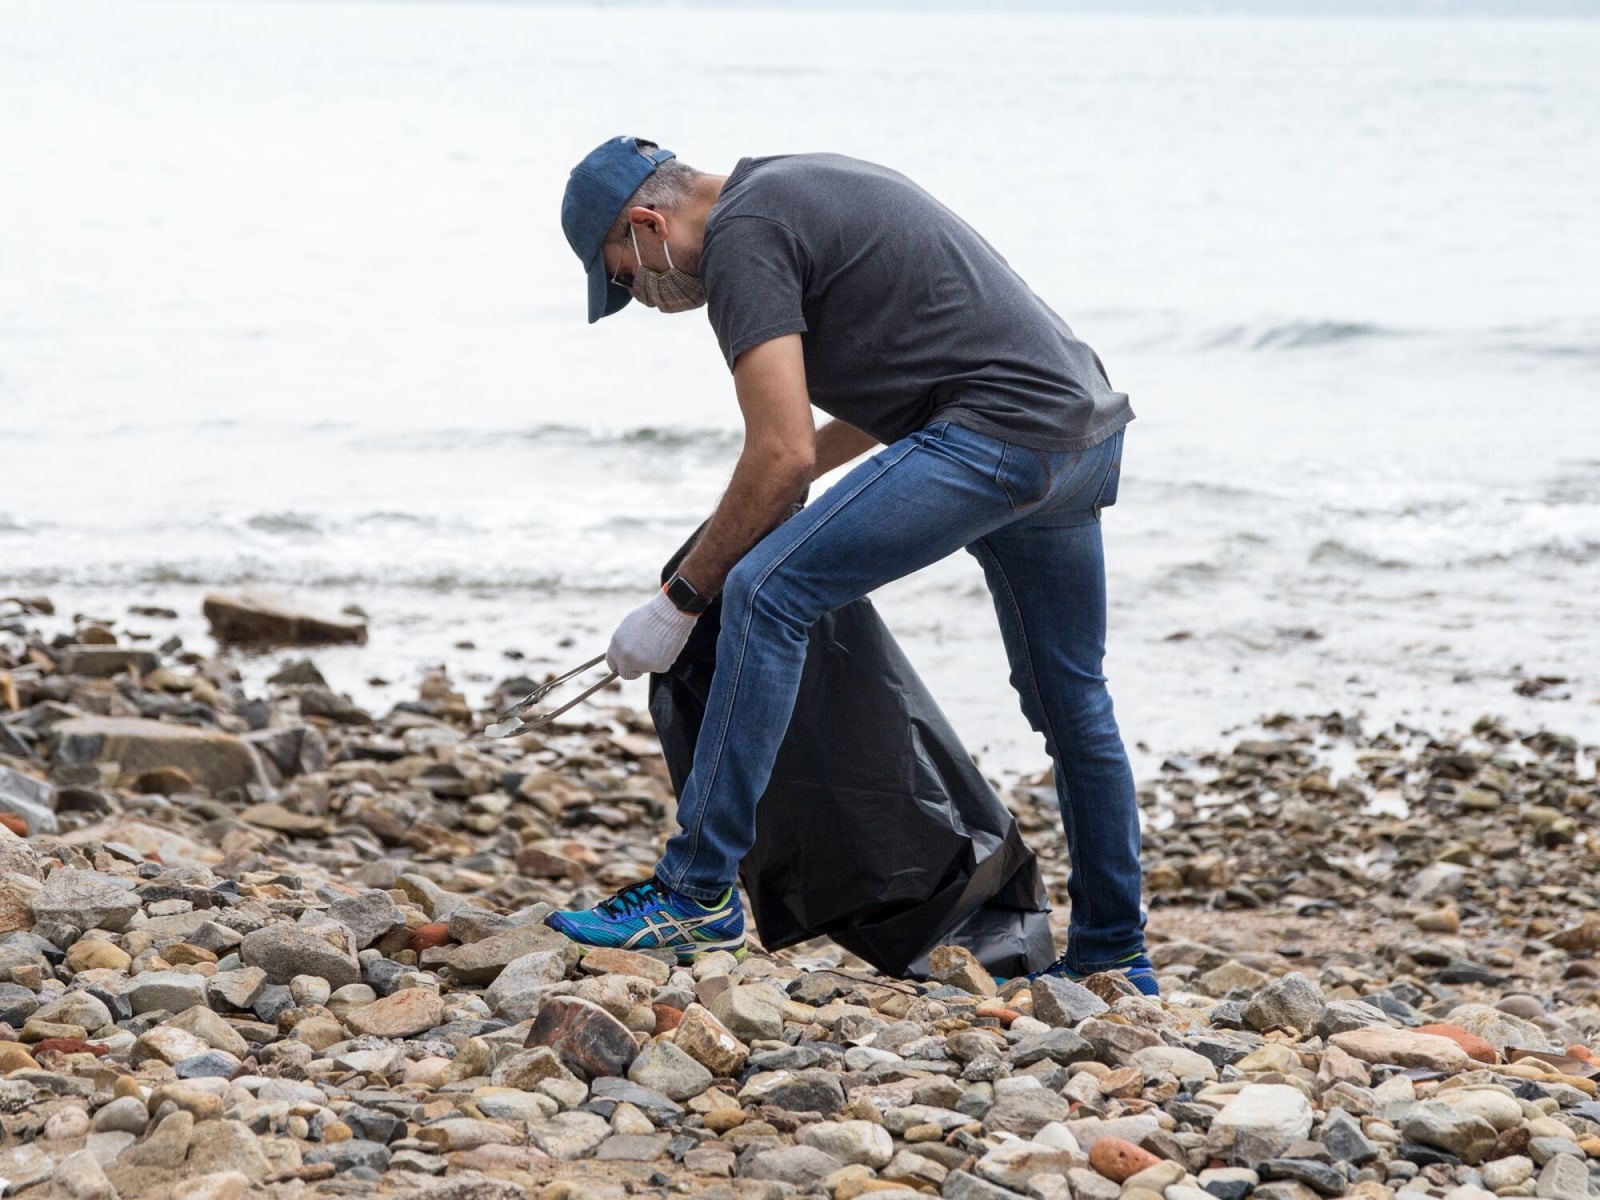 A man holding a black garbage bag is bending over to collect plastic trash on a beach.